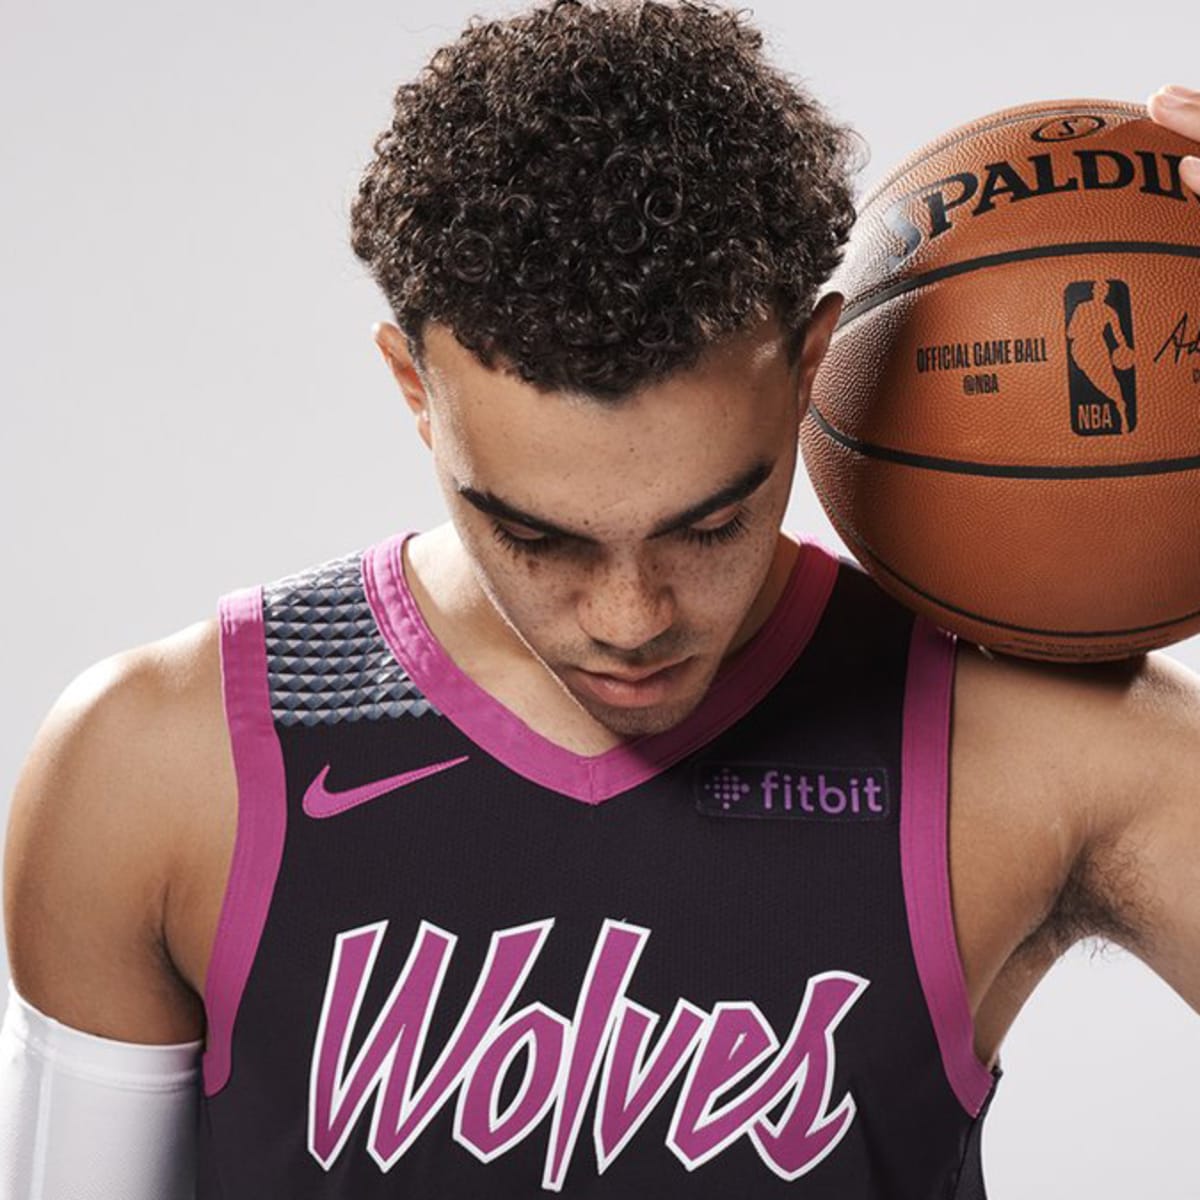 Minnesota Timberwolves' new uniforms inspired by Prince are perfect 